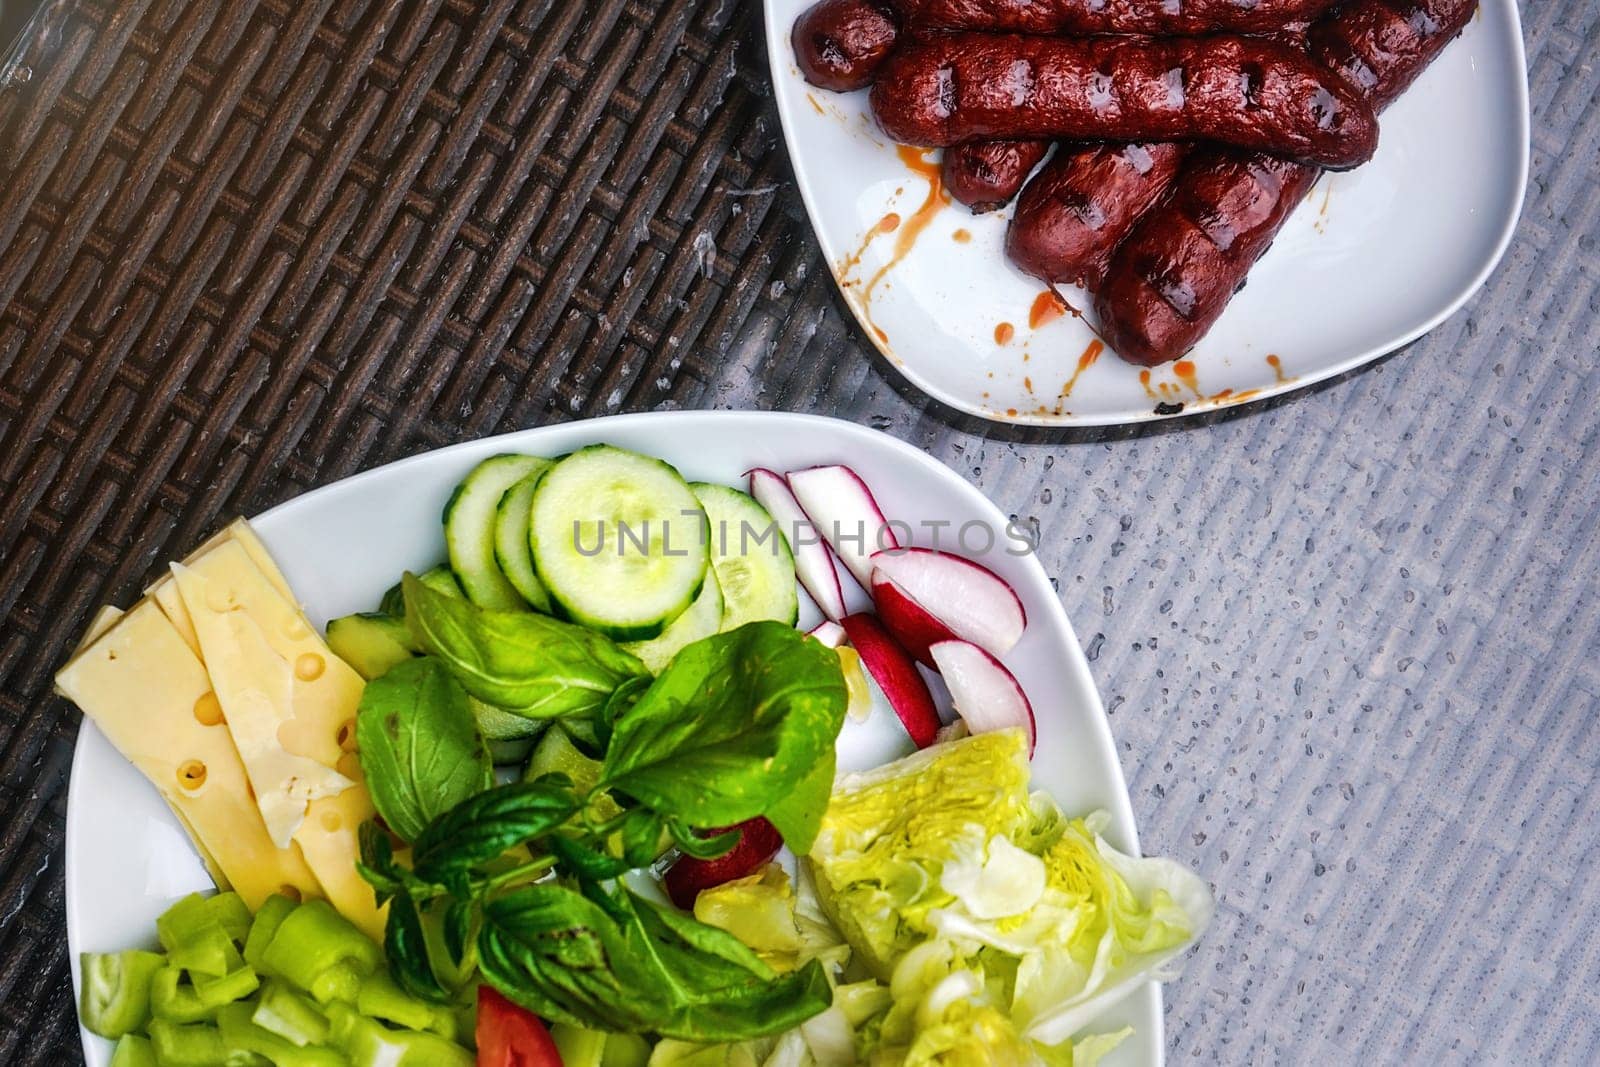 Two white plates, one with grilled bratwursts / frankfurters, other with salad - cucumbers, radish, basil, pepper and cheese. View from above by Ivanko